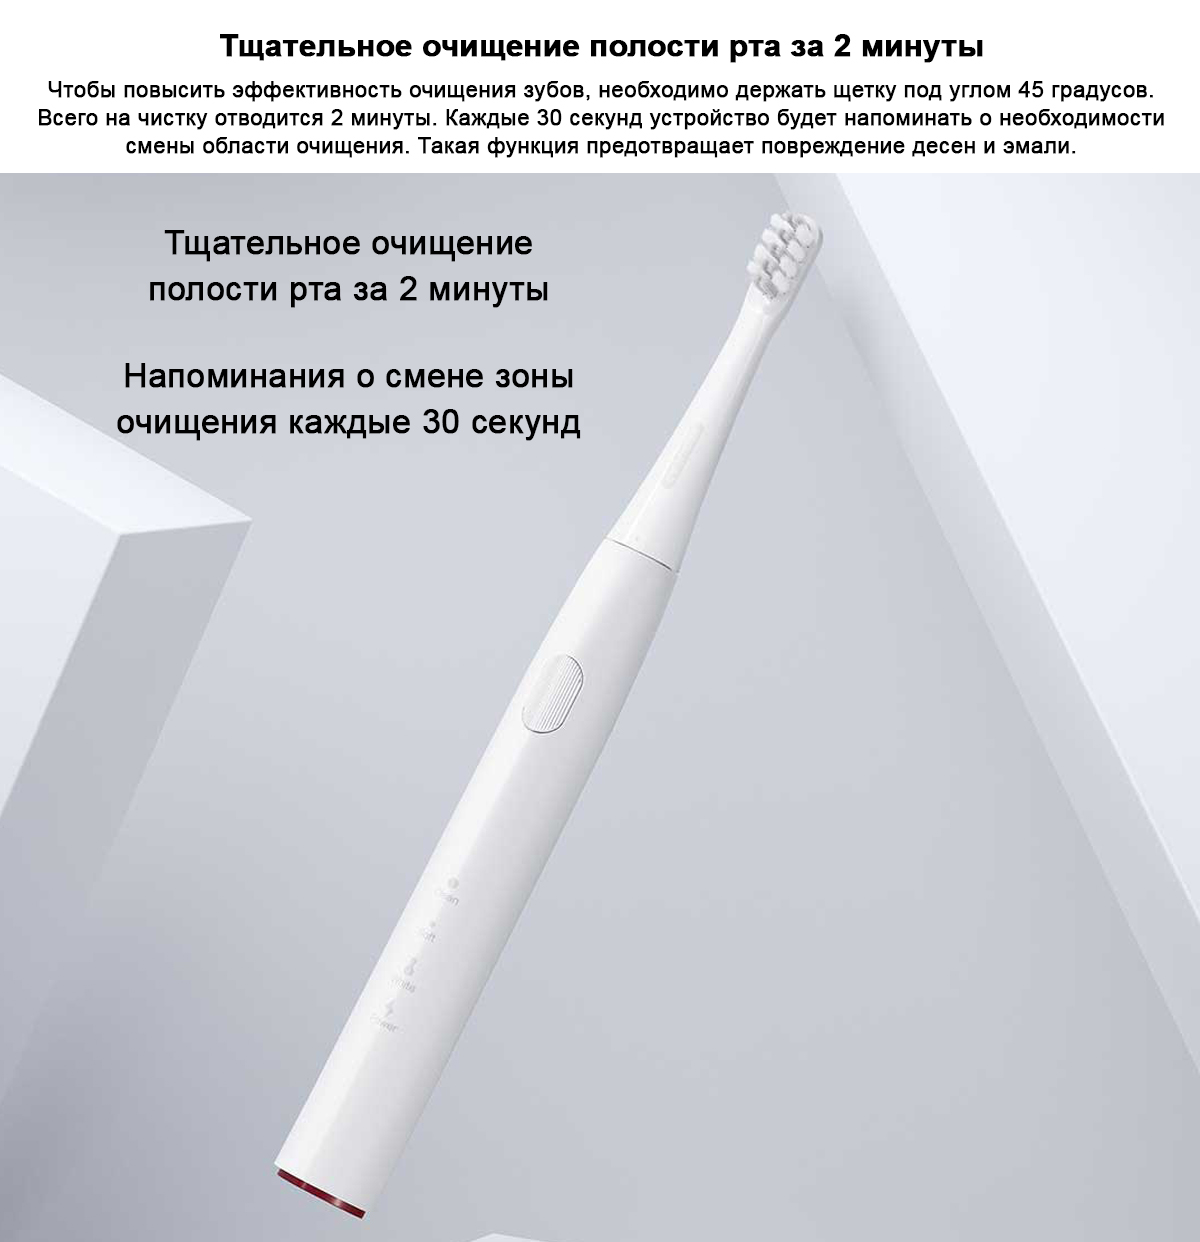 DR.BEI Sonic Electric Toothbrush GY1